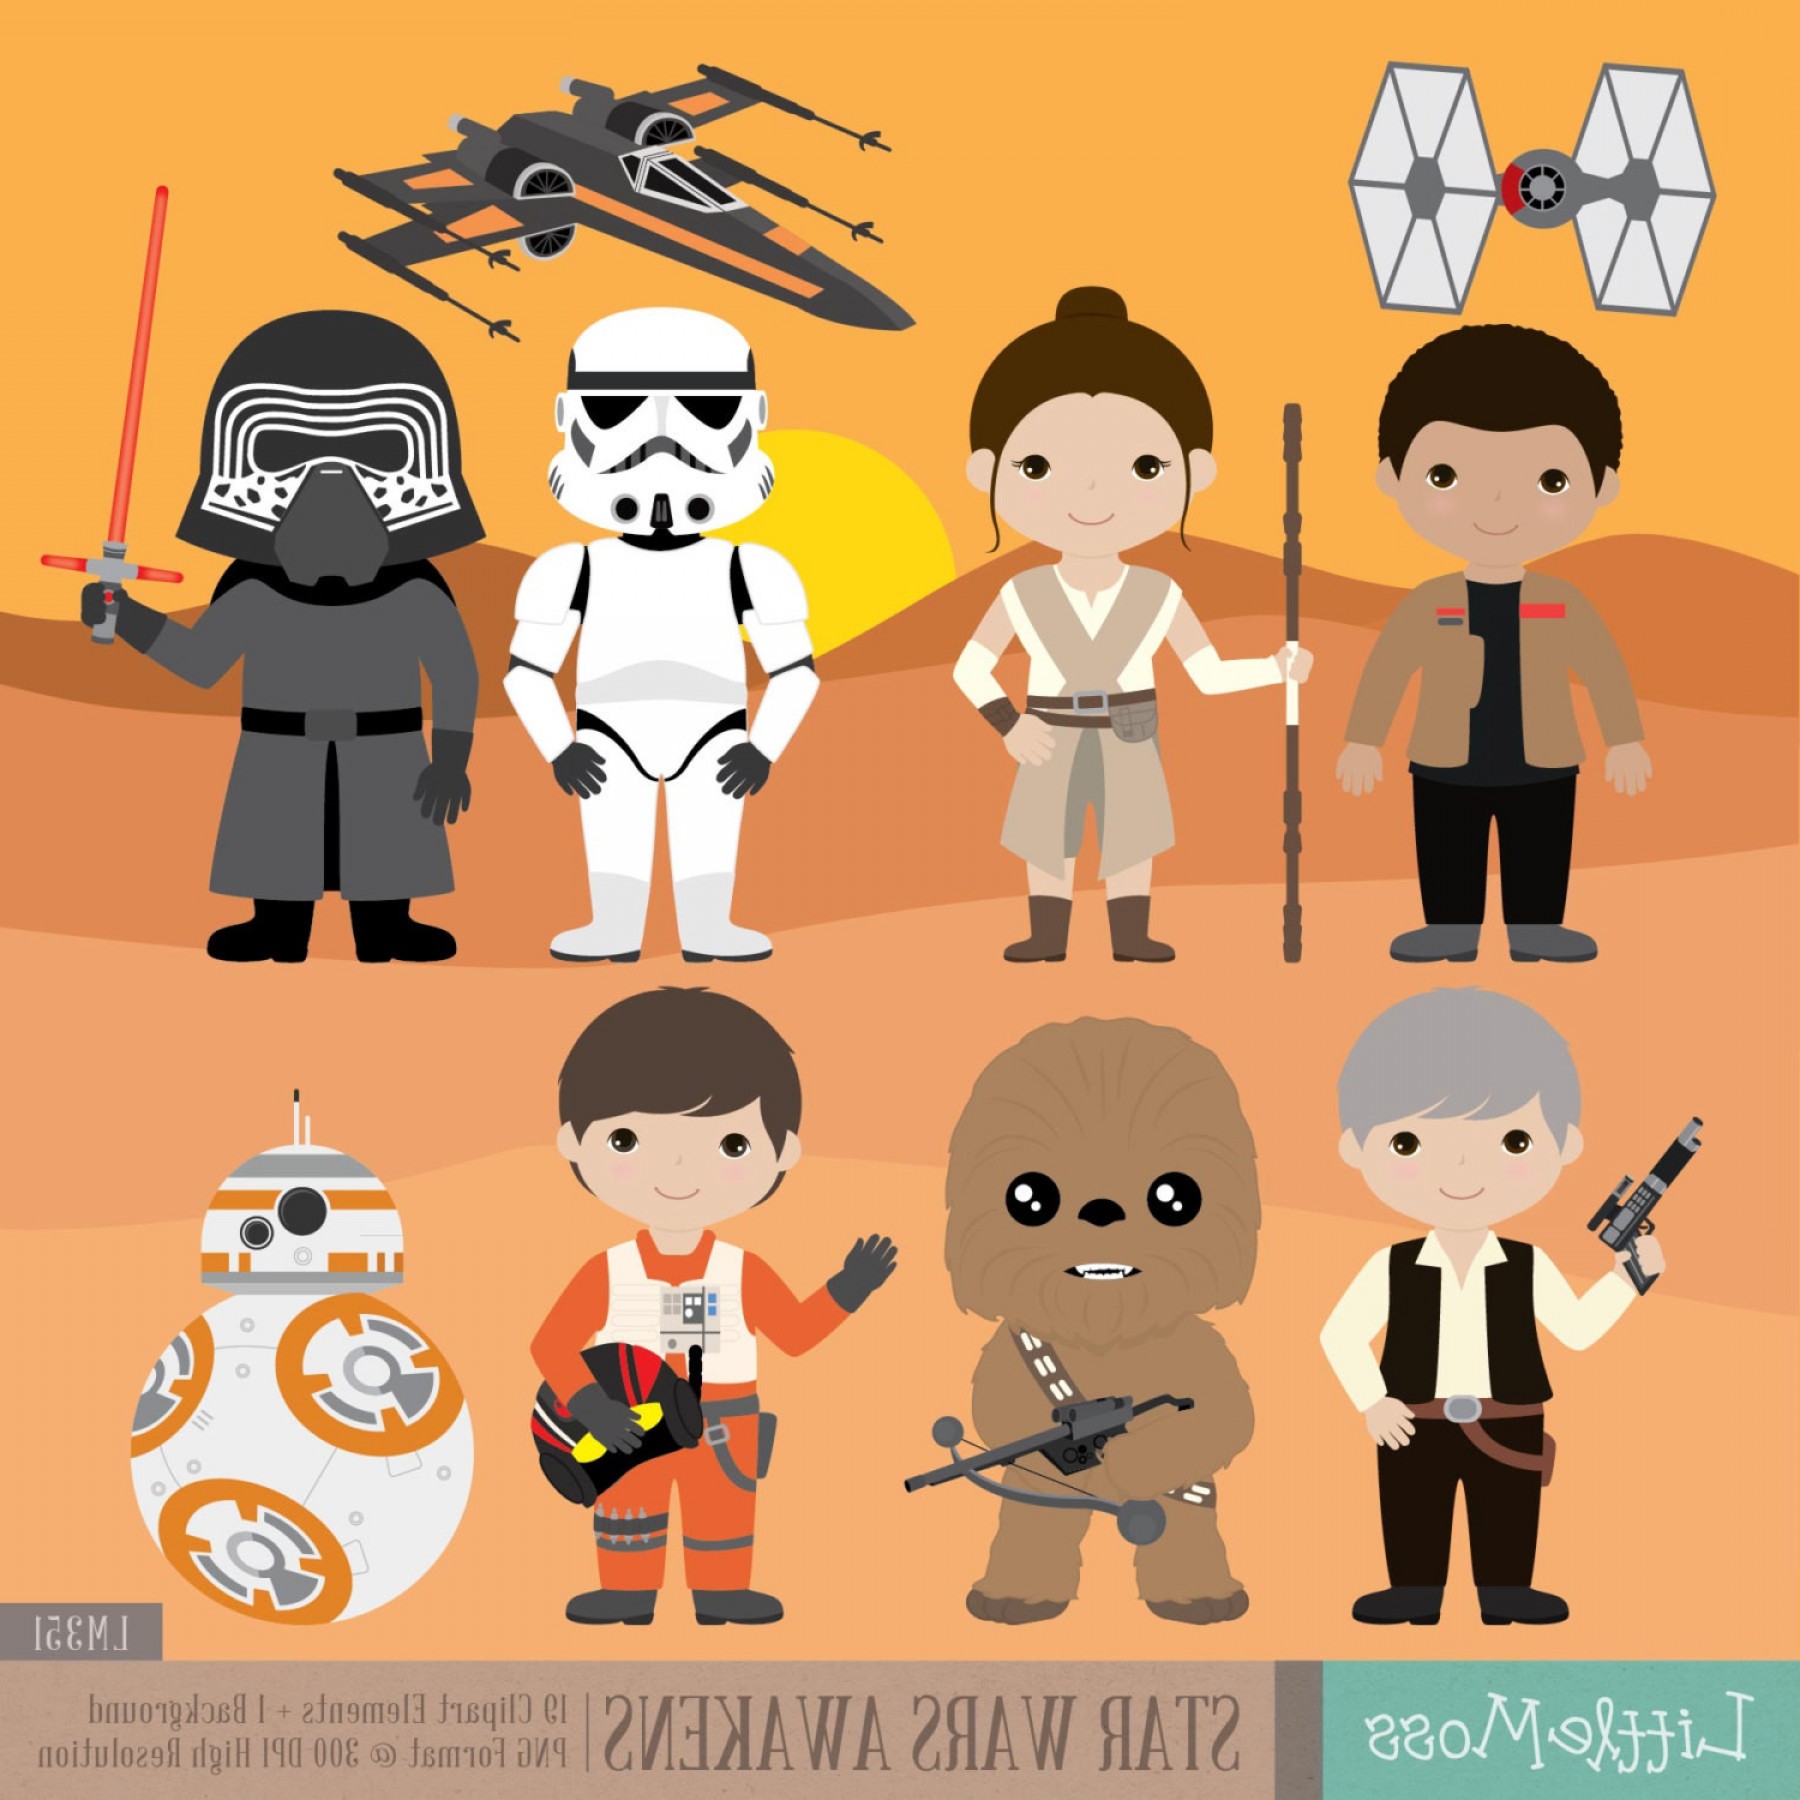 Il Fullxfull Qz Jpg Version Exceptional Star Wars Characters